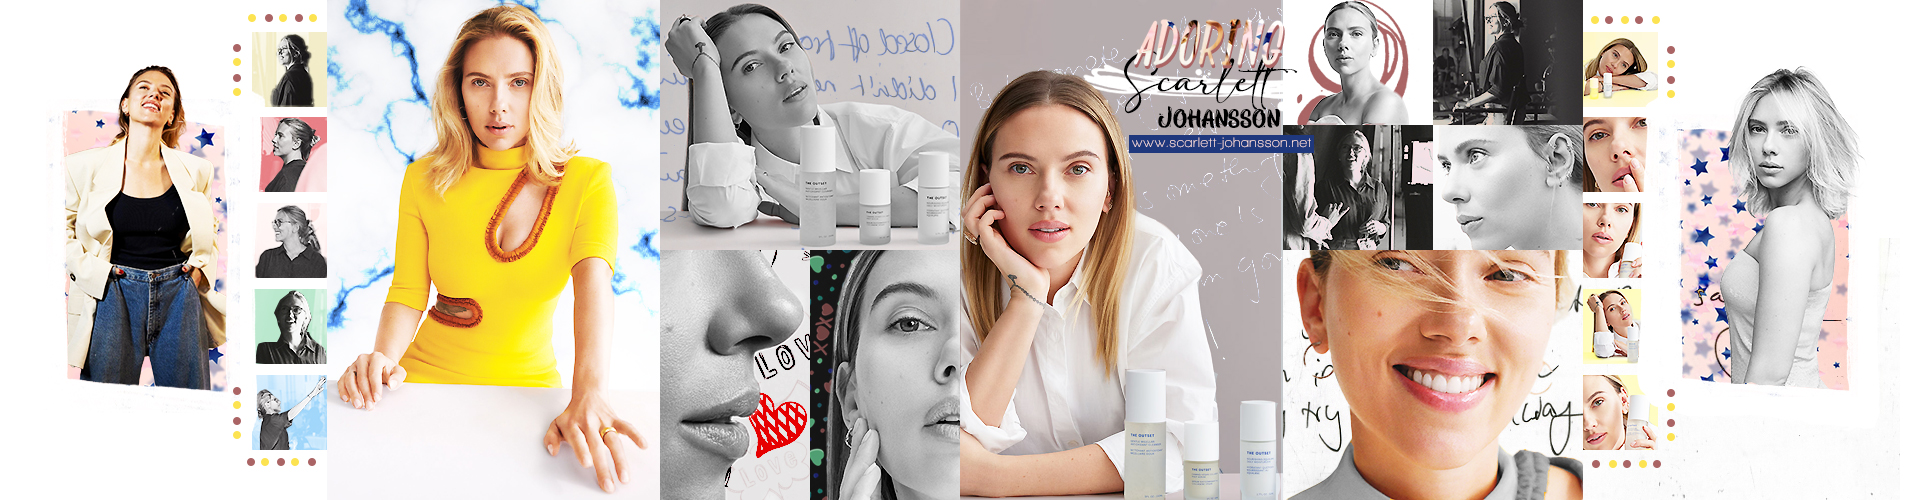 Scarlett Johansson talks skincare, tries her hand at directing TODAY